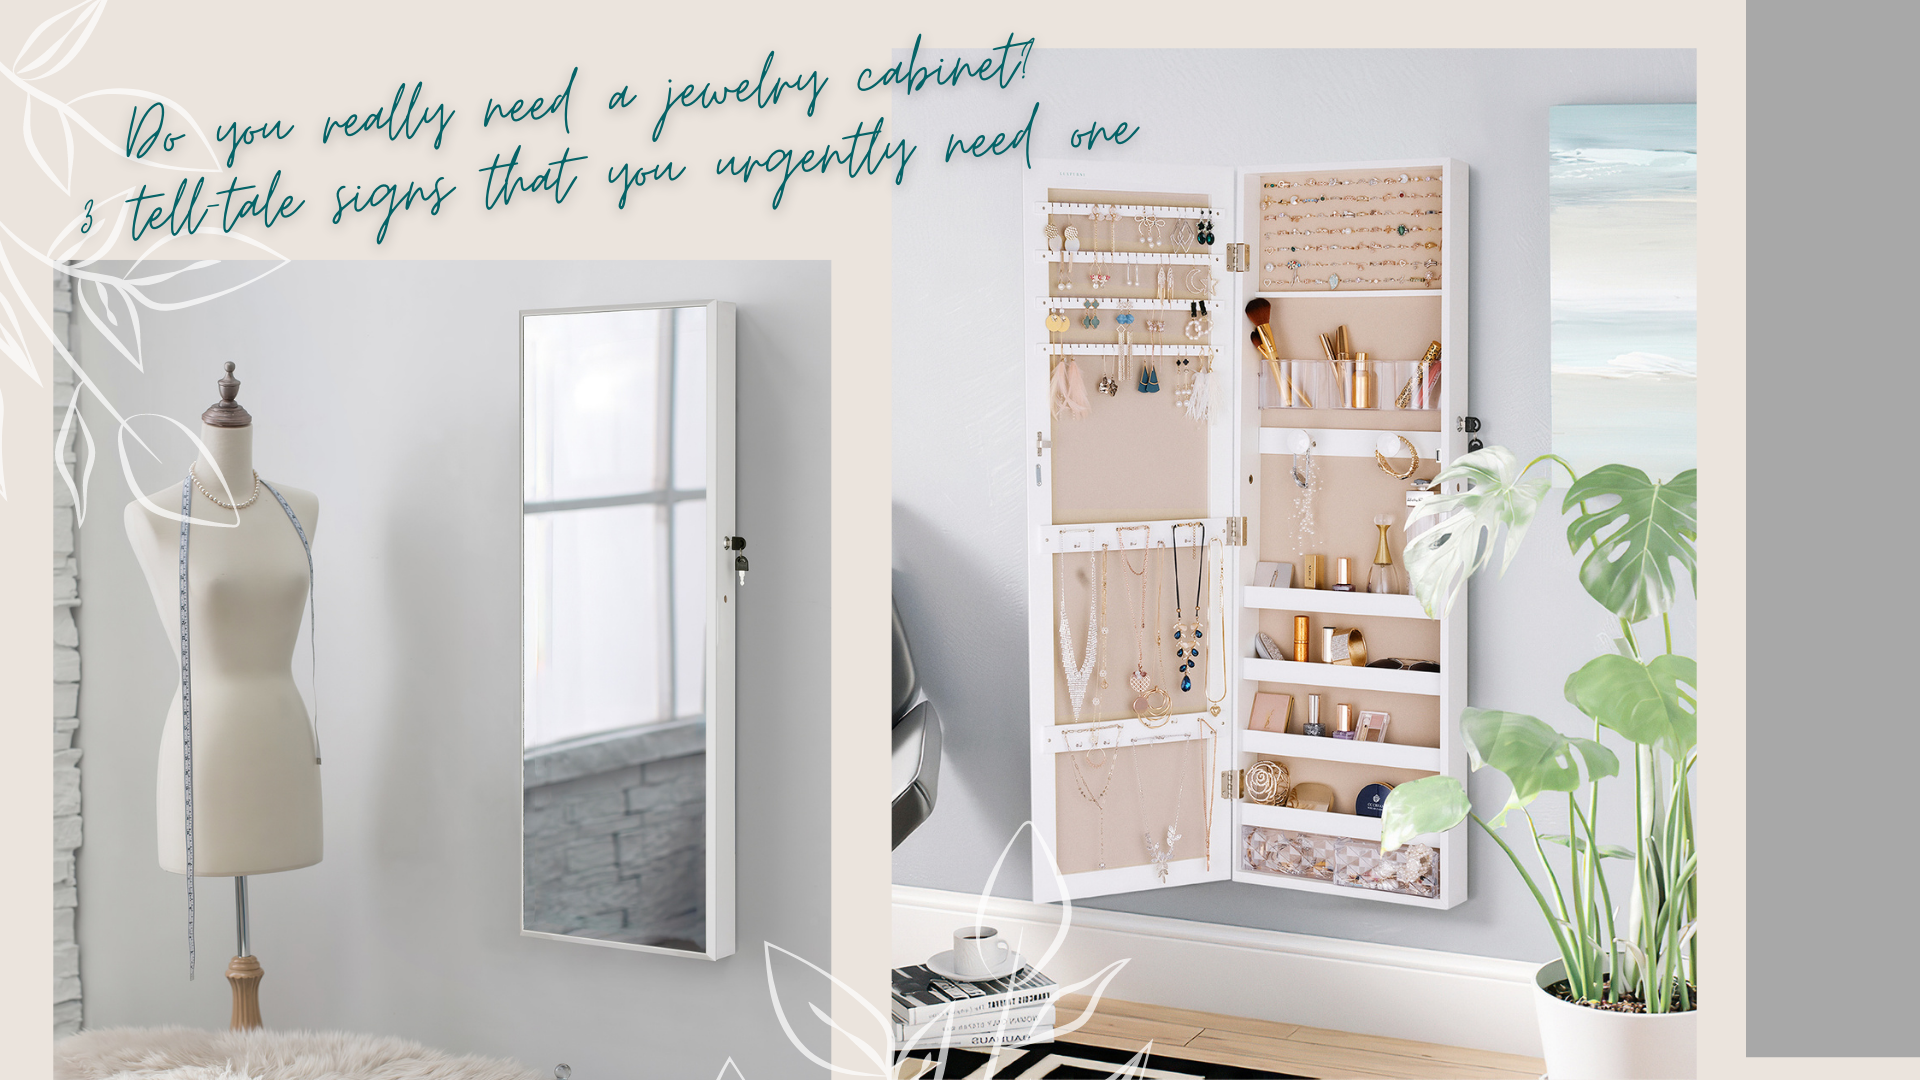 3 tell-tale signs that you urgently need a jewelry cabinet - Luxfurni